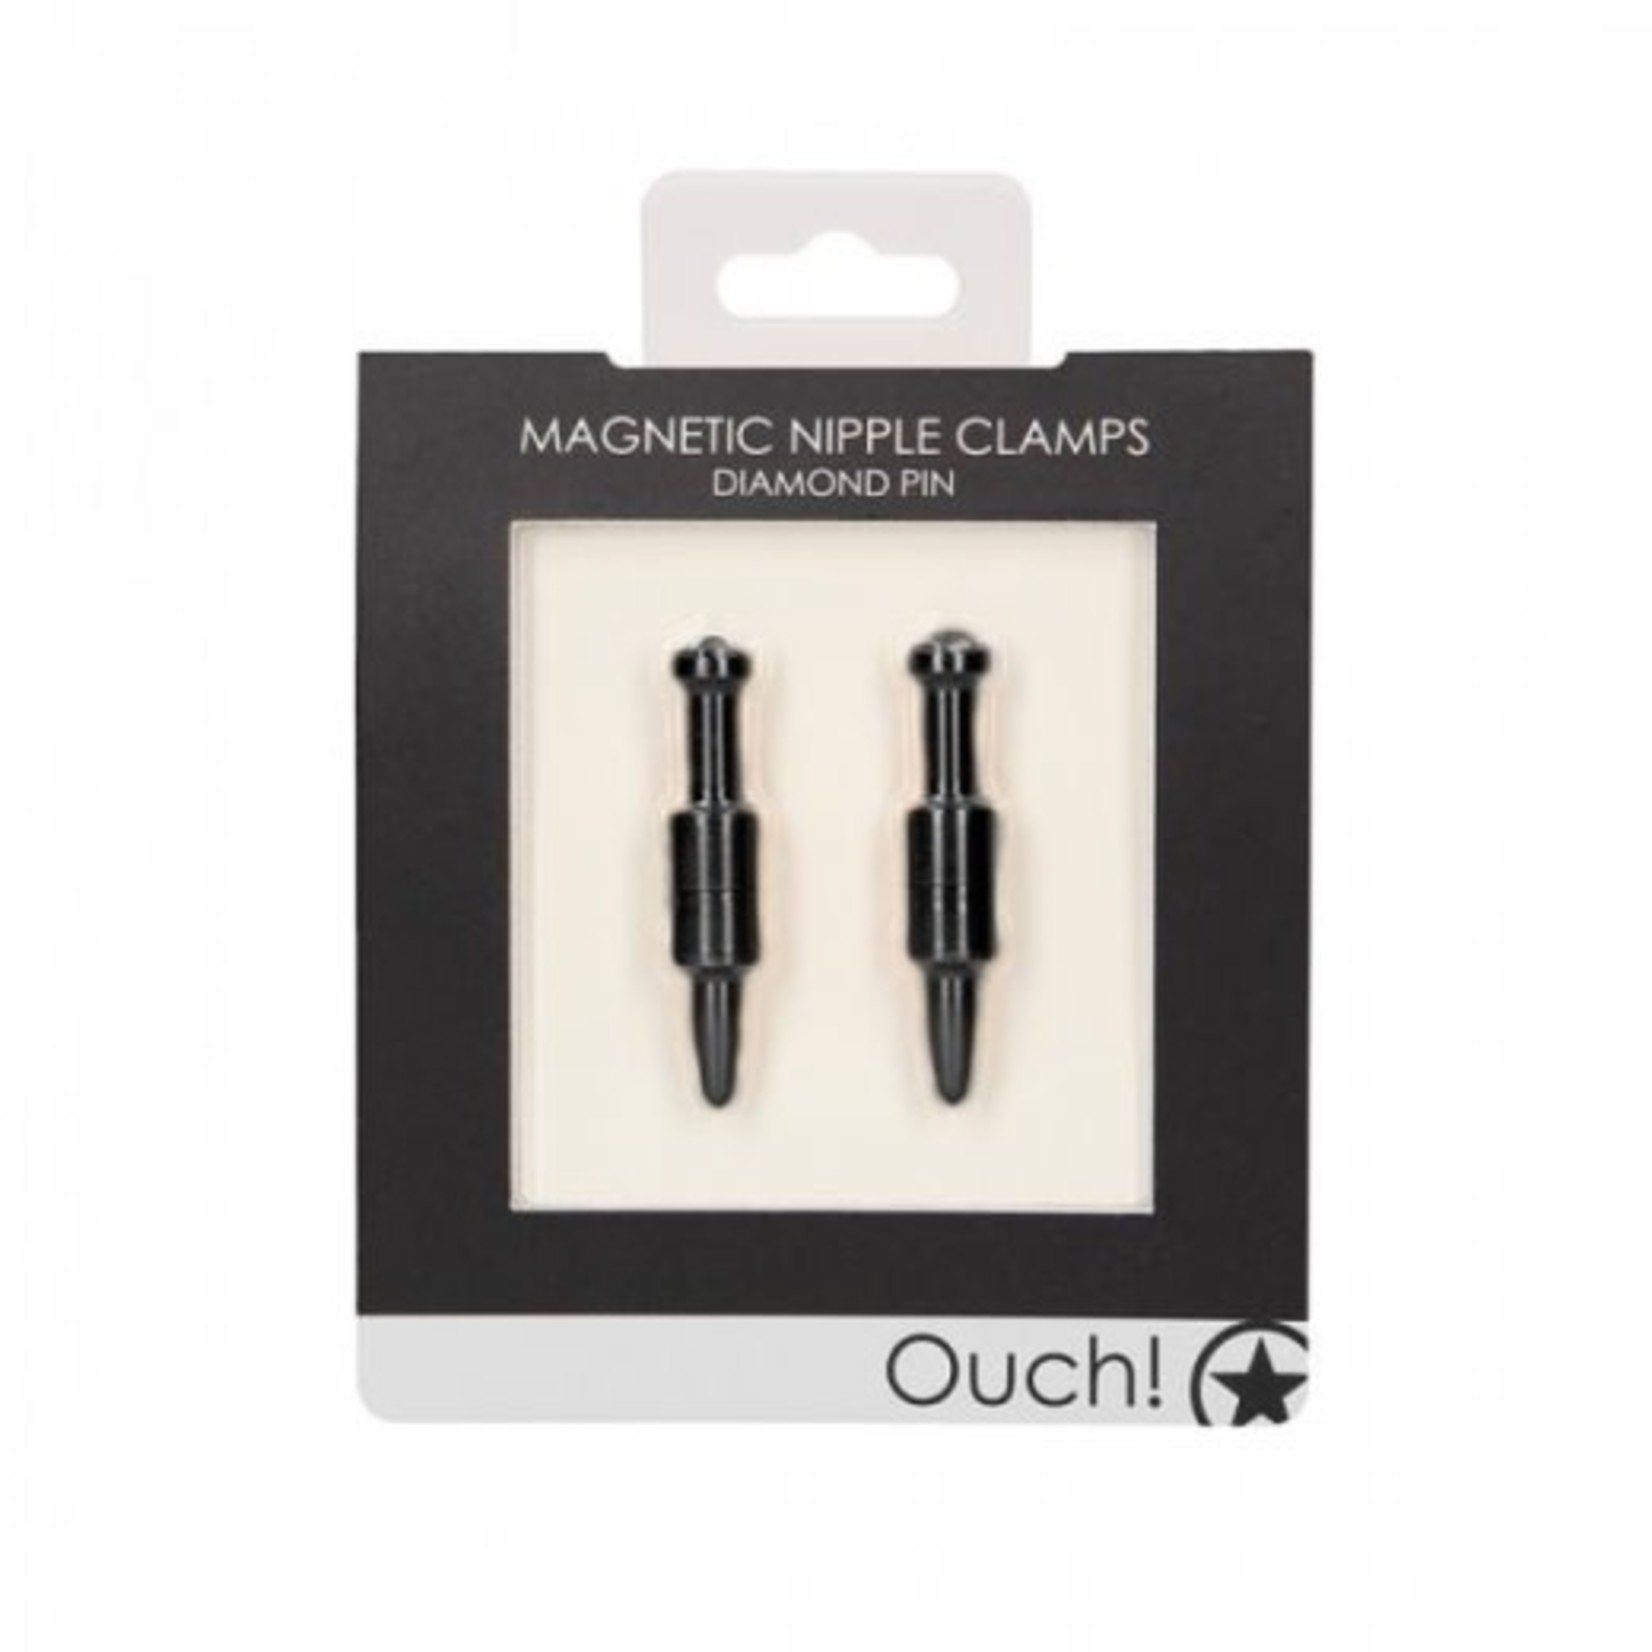 OUCH OUCH! MAGNETIC DIAMOND PIN NIPPLE CLAMPS